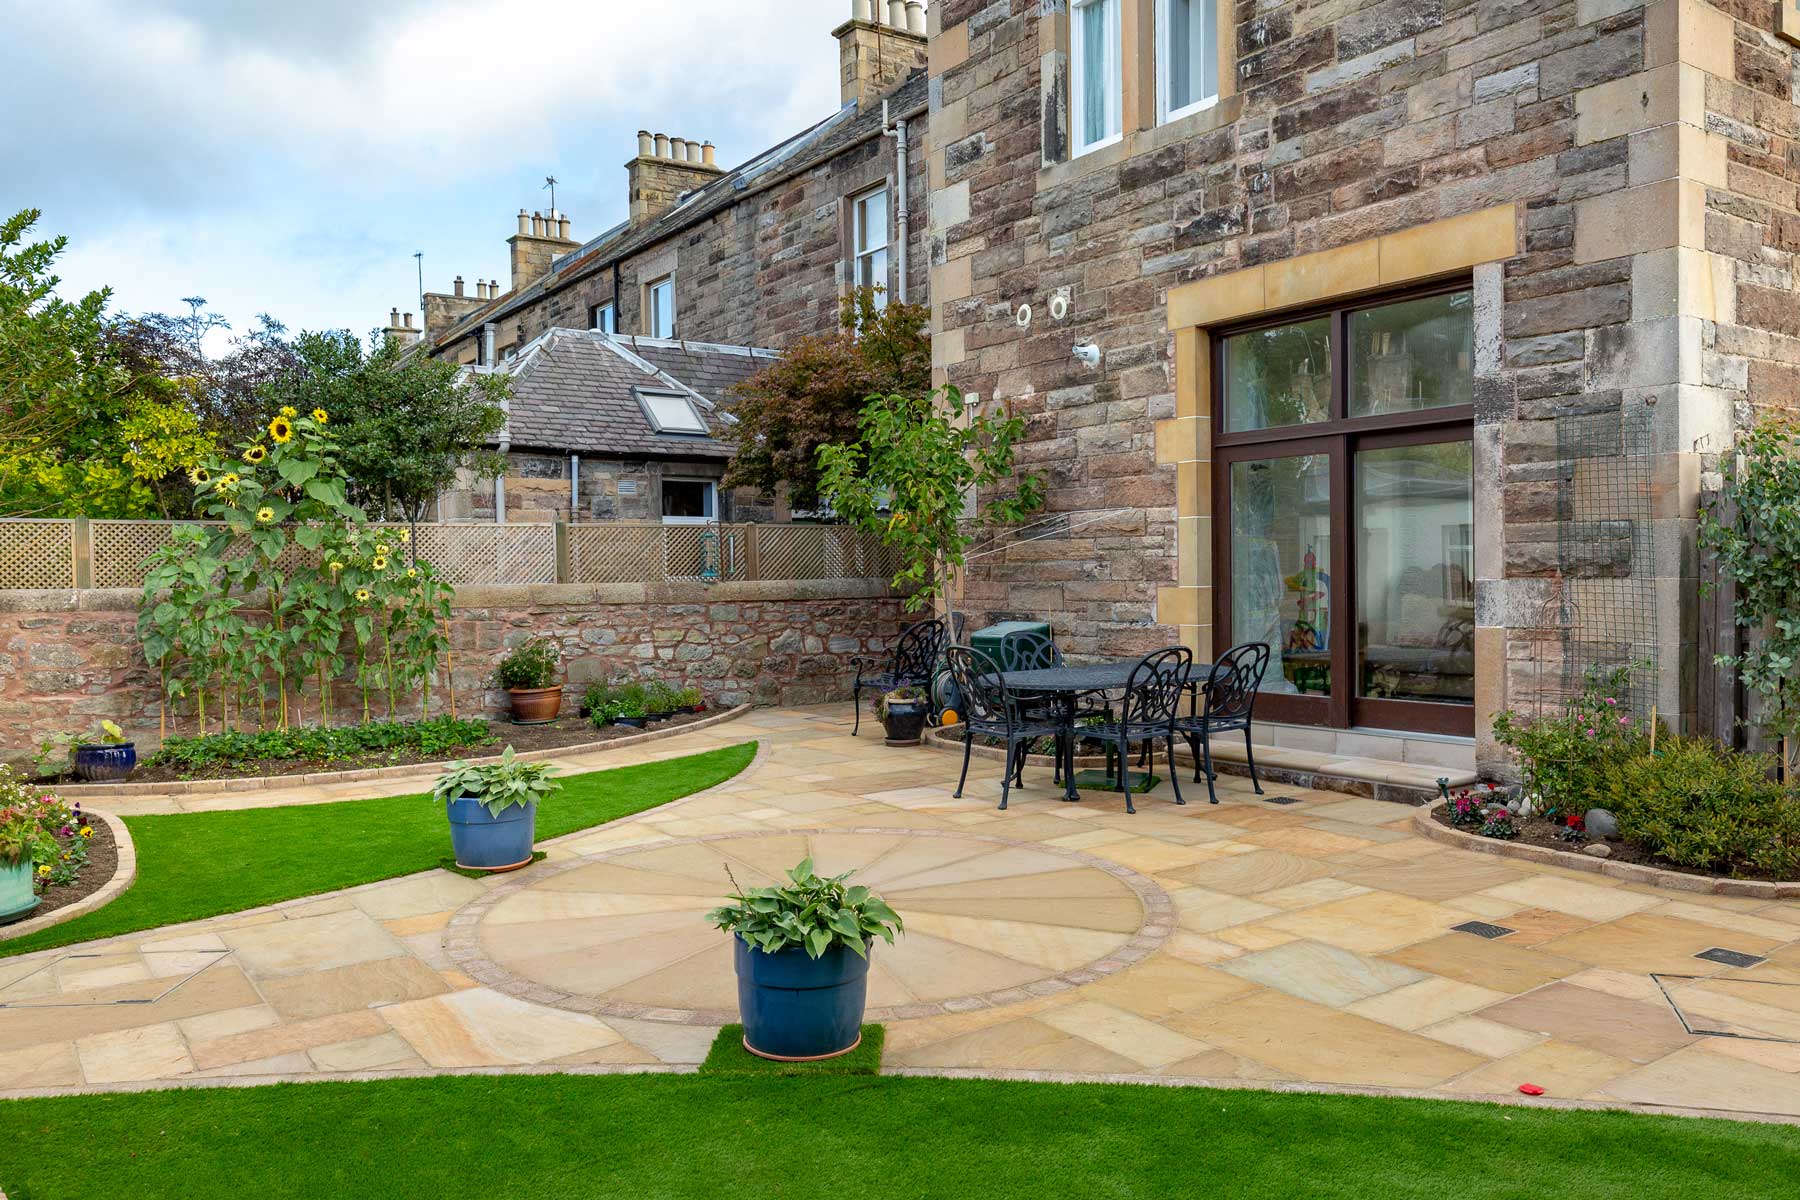 Garden design, patio, paths, artificial grass & landscaping by Stow Construction & Landscaping in Morningside Grove, Edinburgh 2018 using Marshalls Fairstone Riven Harena Golden Sand, Marshalls Fairstone Riven Harena Golden Sand new circle, Marshalls Tegula Drivesett Harvest, Weatherpoint Buff 365, Marshalls Fairstone Sawn Vesuro bull-nosed step units, Namgrass, Marshalls Drivesett kerbs Harvest